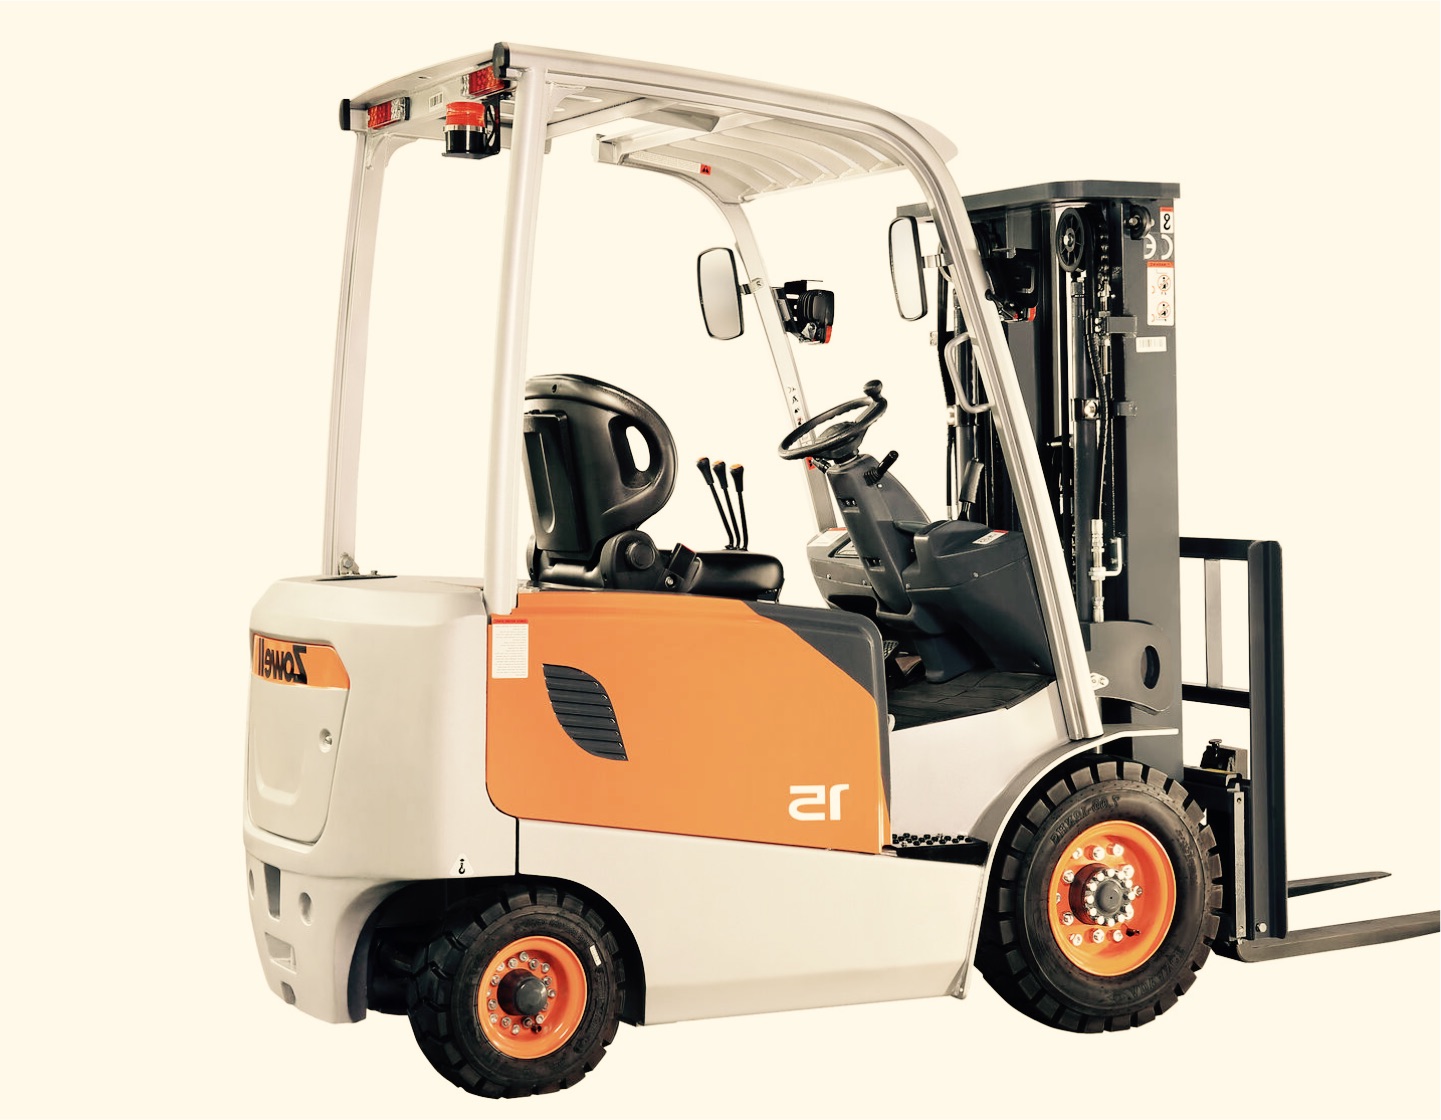 Zowell Forklift Manuals PDF